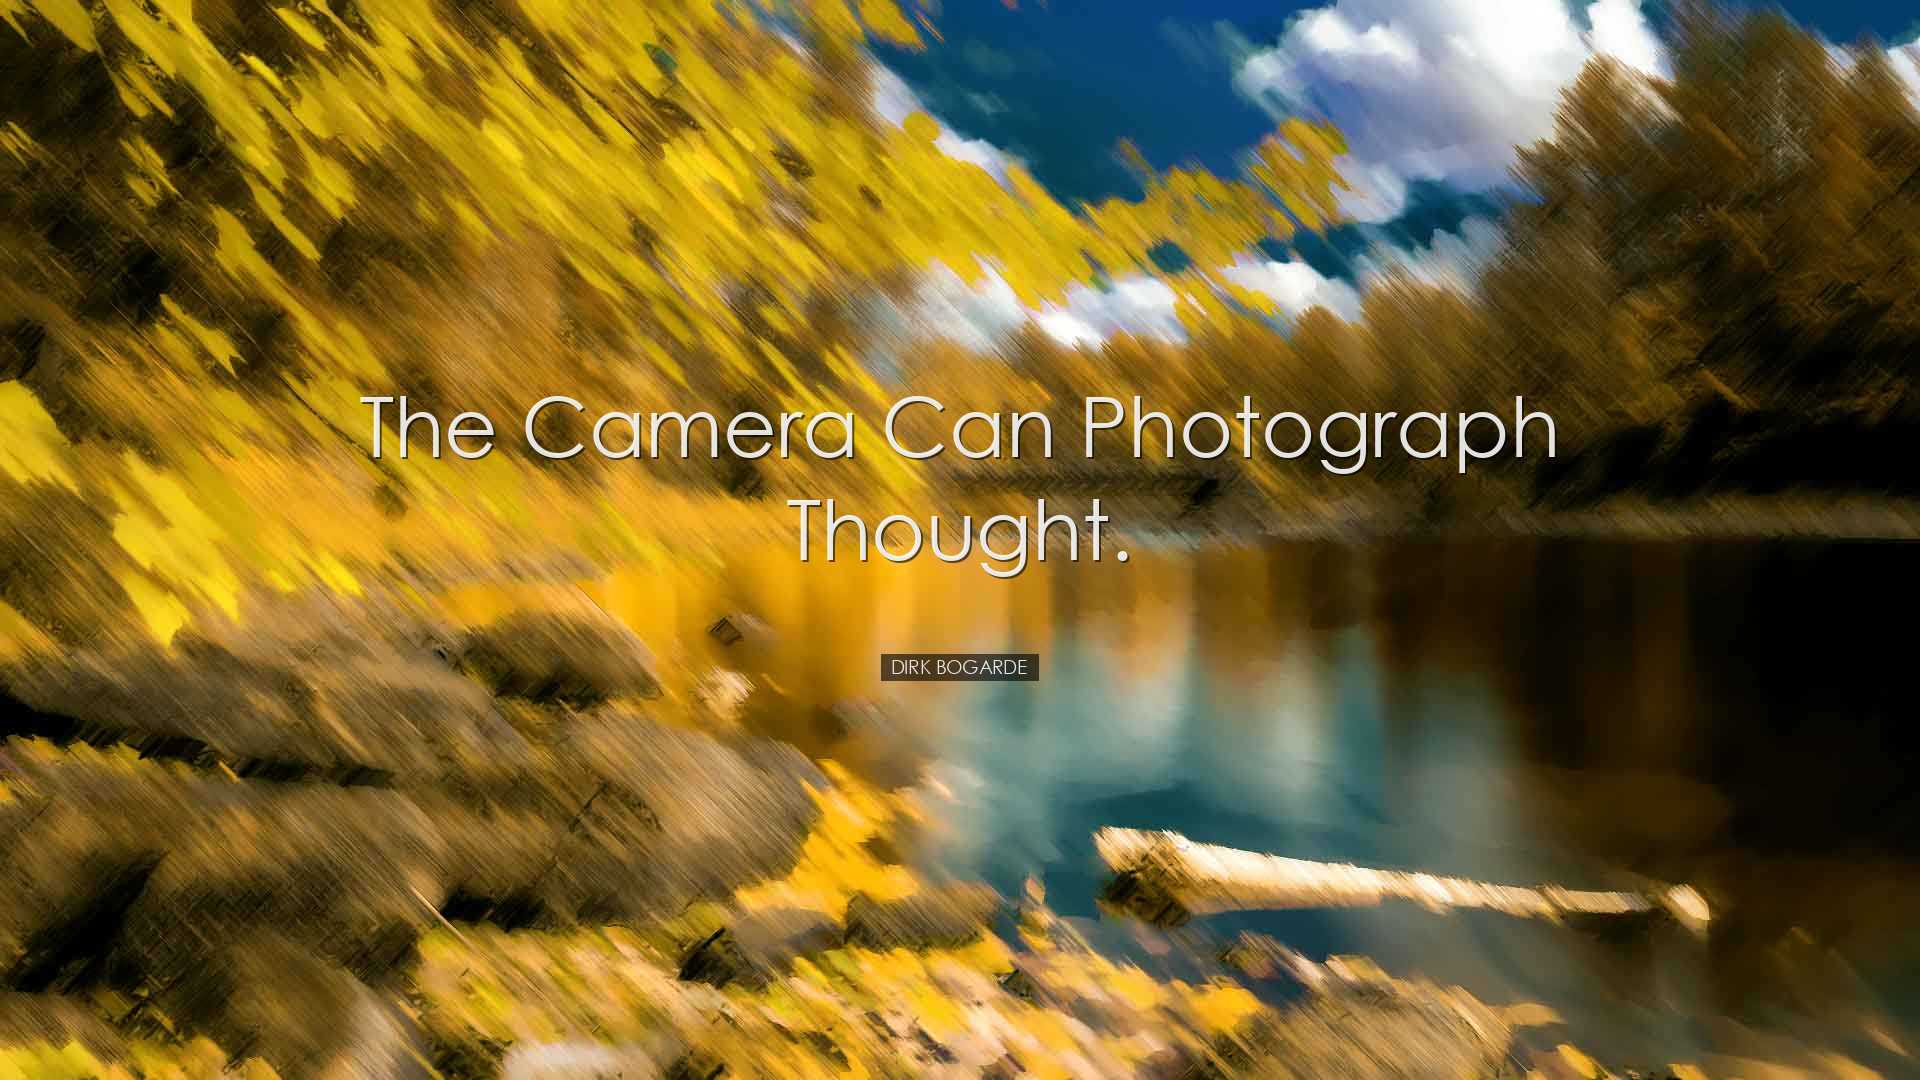 The camera can photograph thought. - Dirk Bogarde